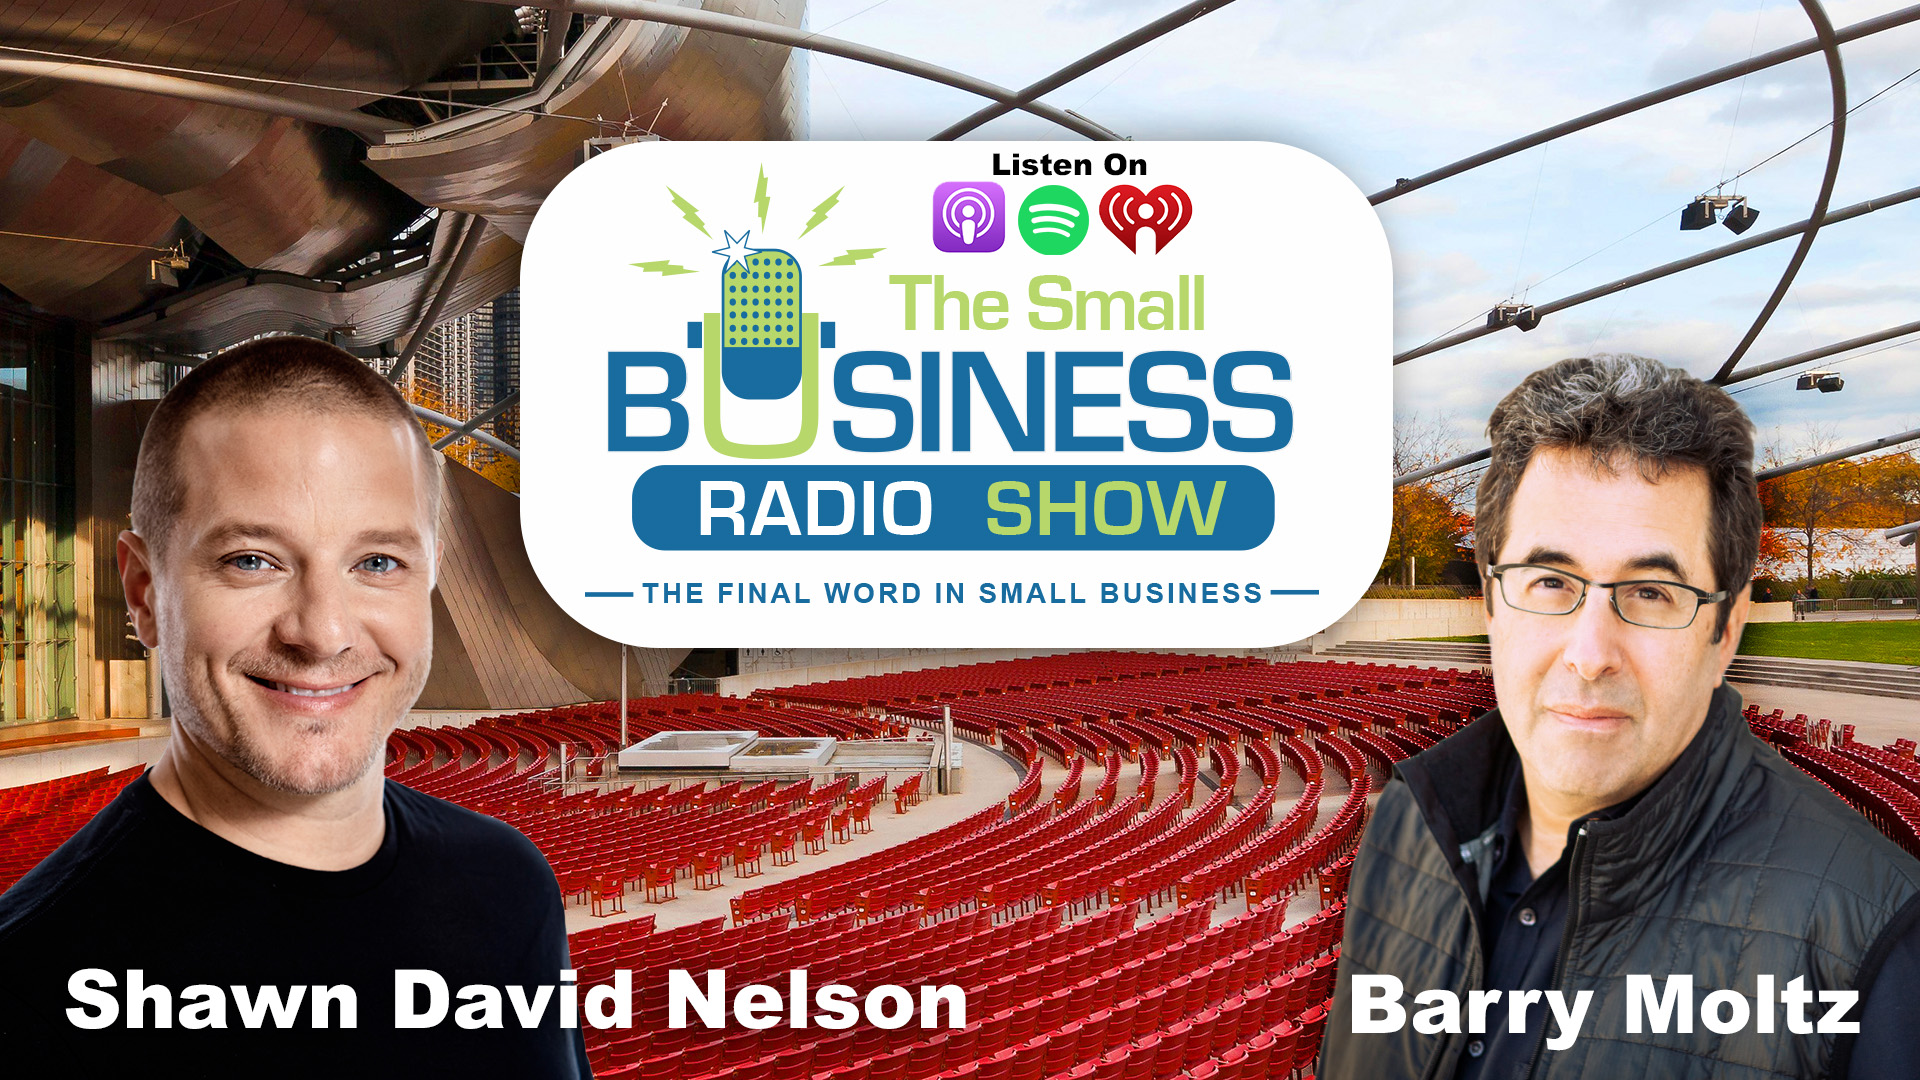 Shawn David Nelson on The Small Business Radio Show - Lovesac